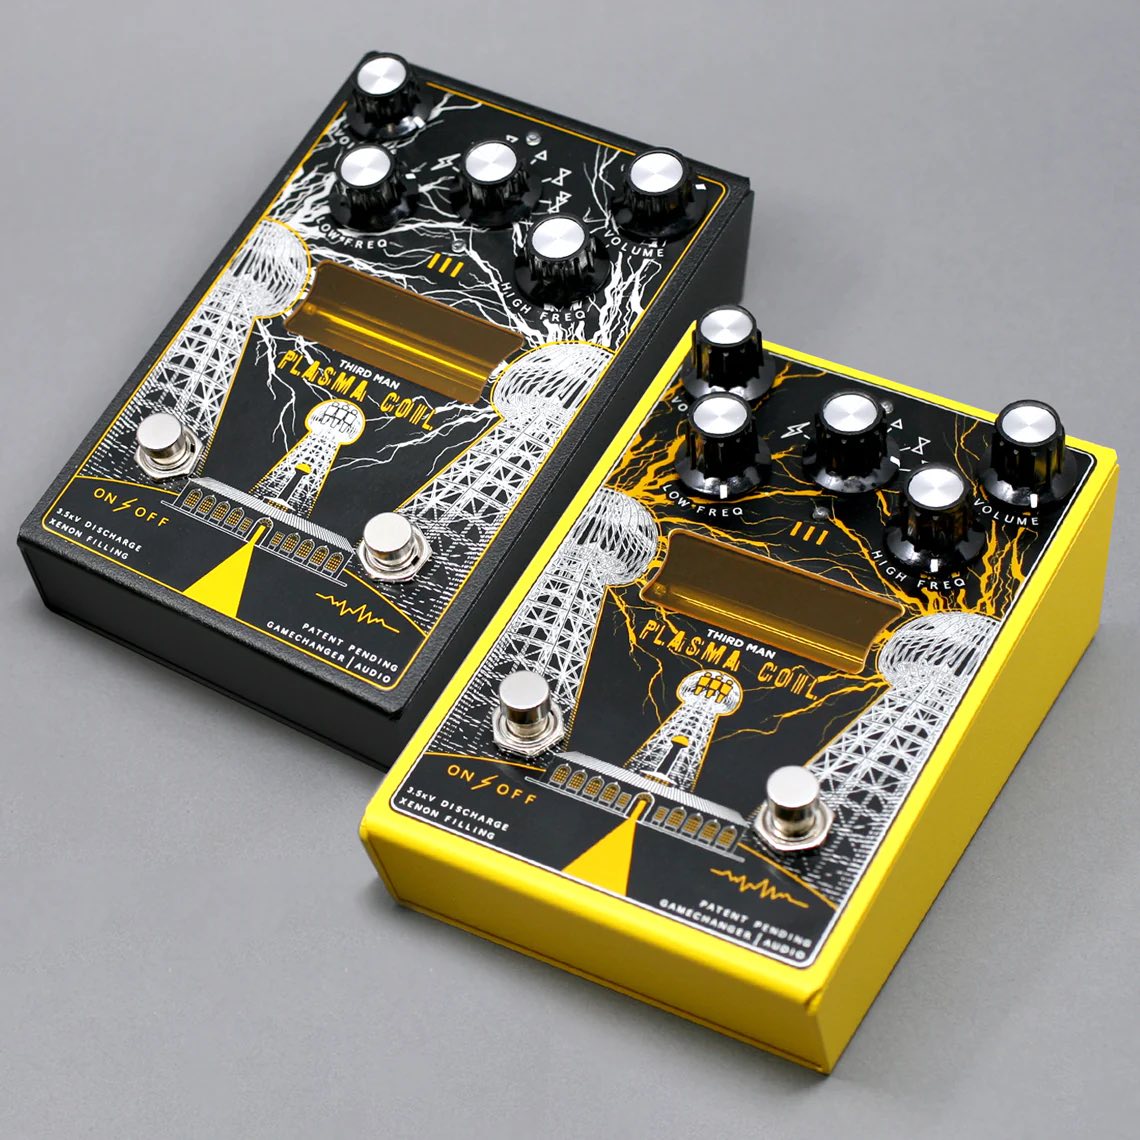 PLASMA Pedal, created by Gamechanger Audio and Third Man Records.